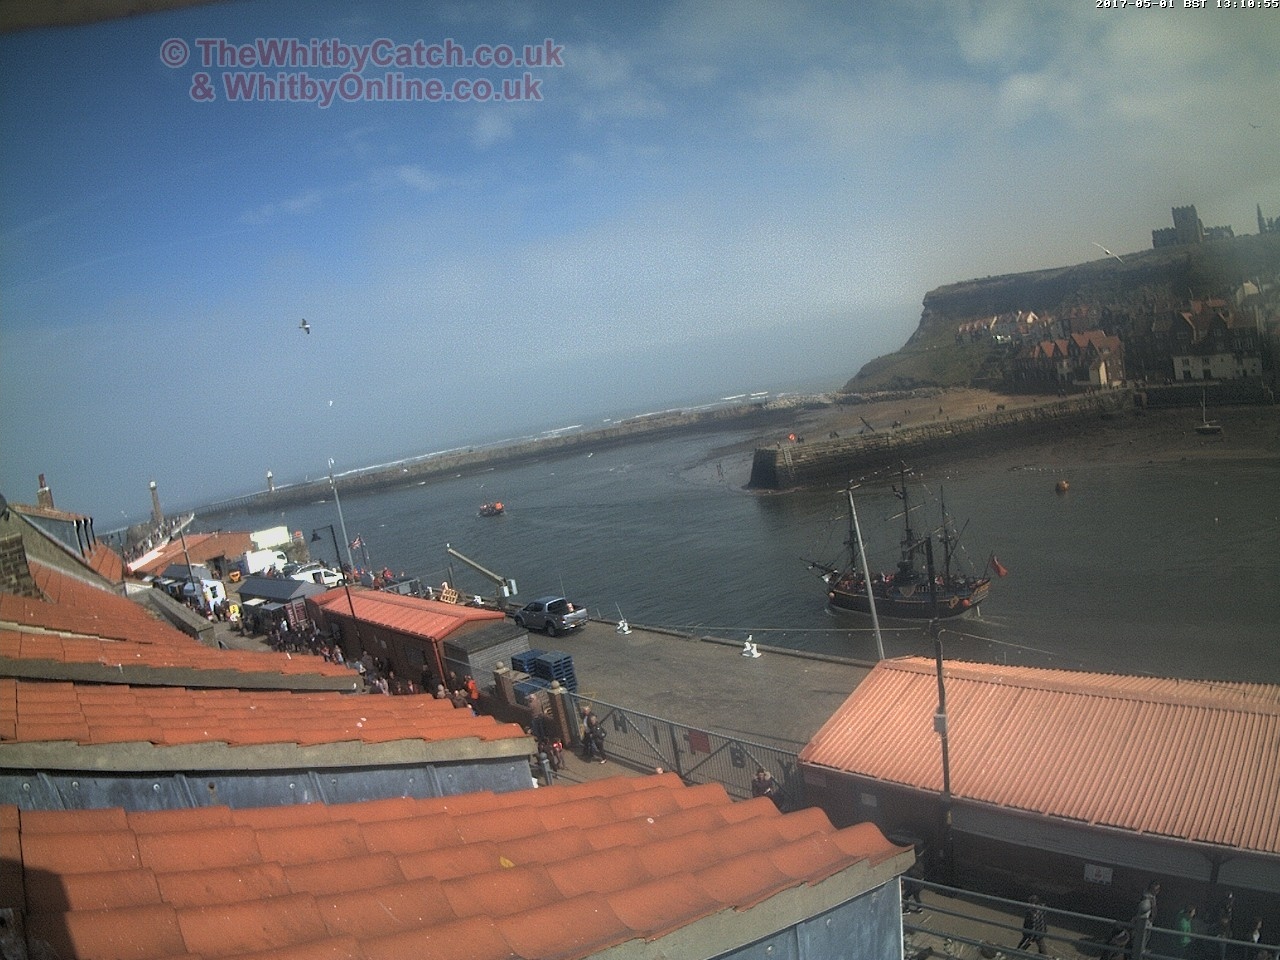 Whitby Mon 1st May 2017 13:11.